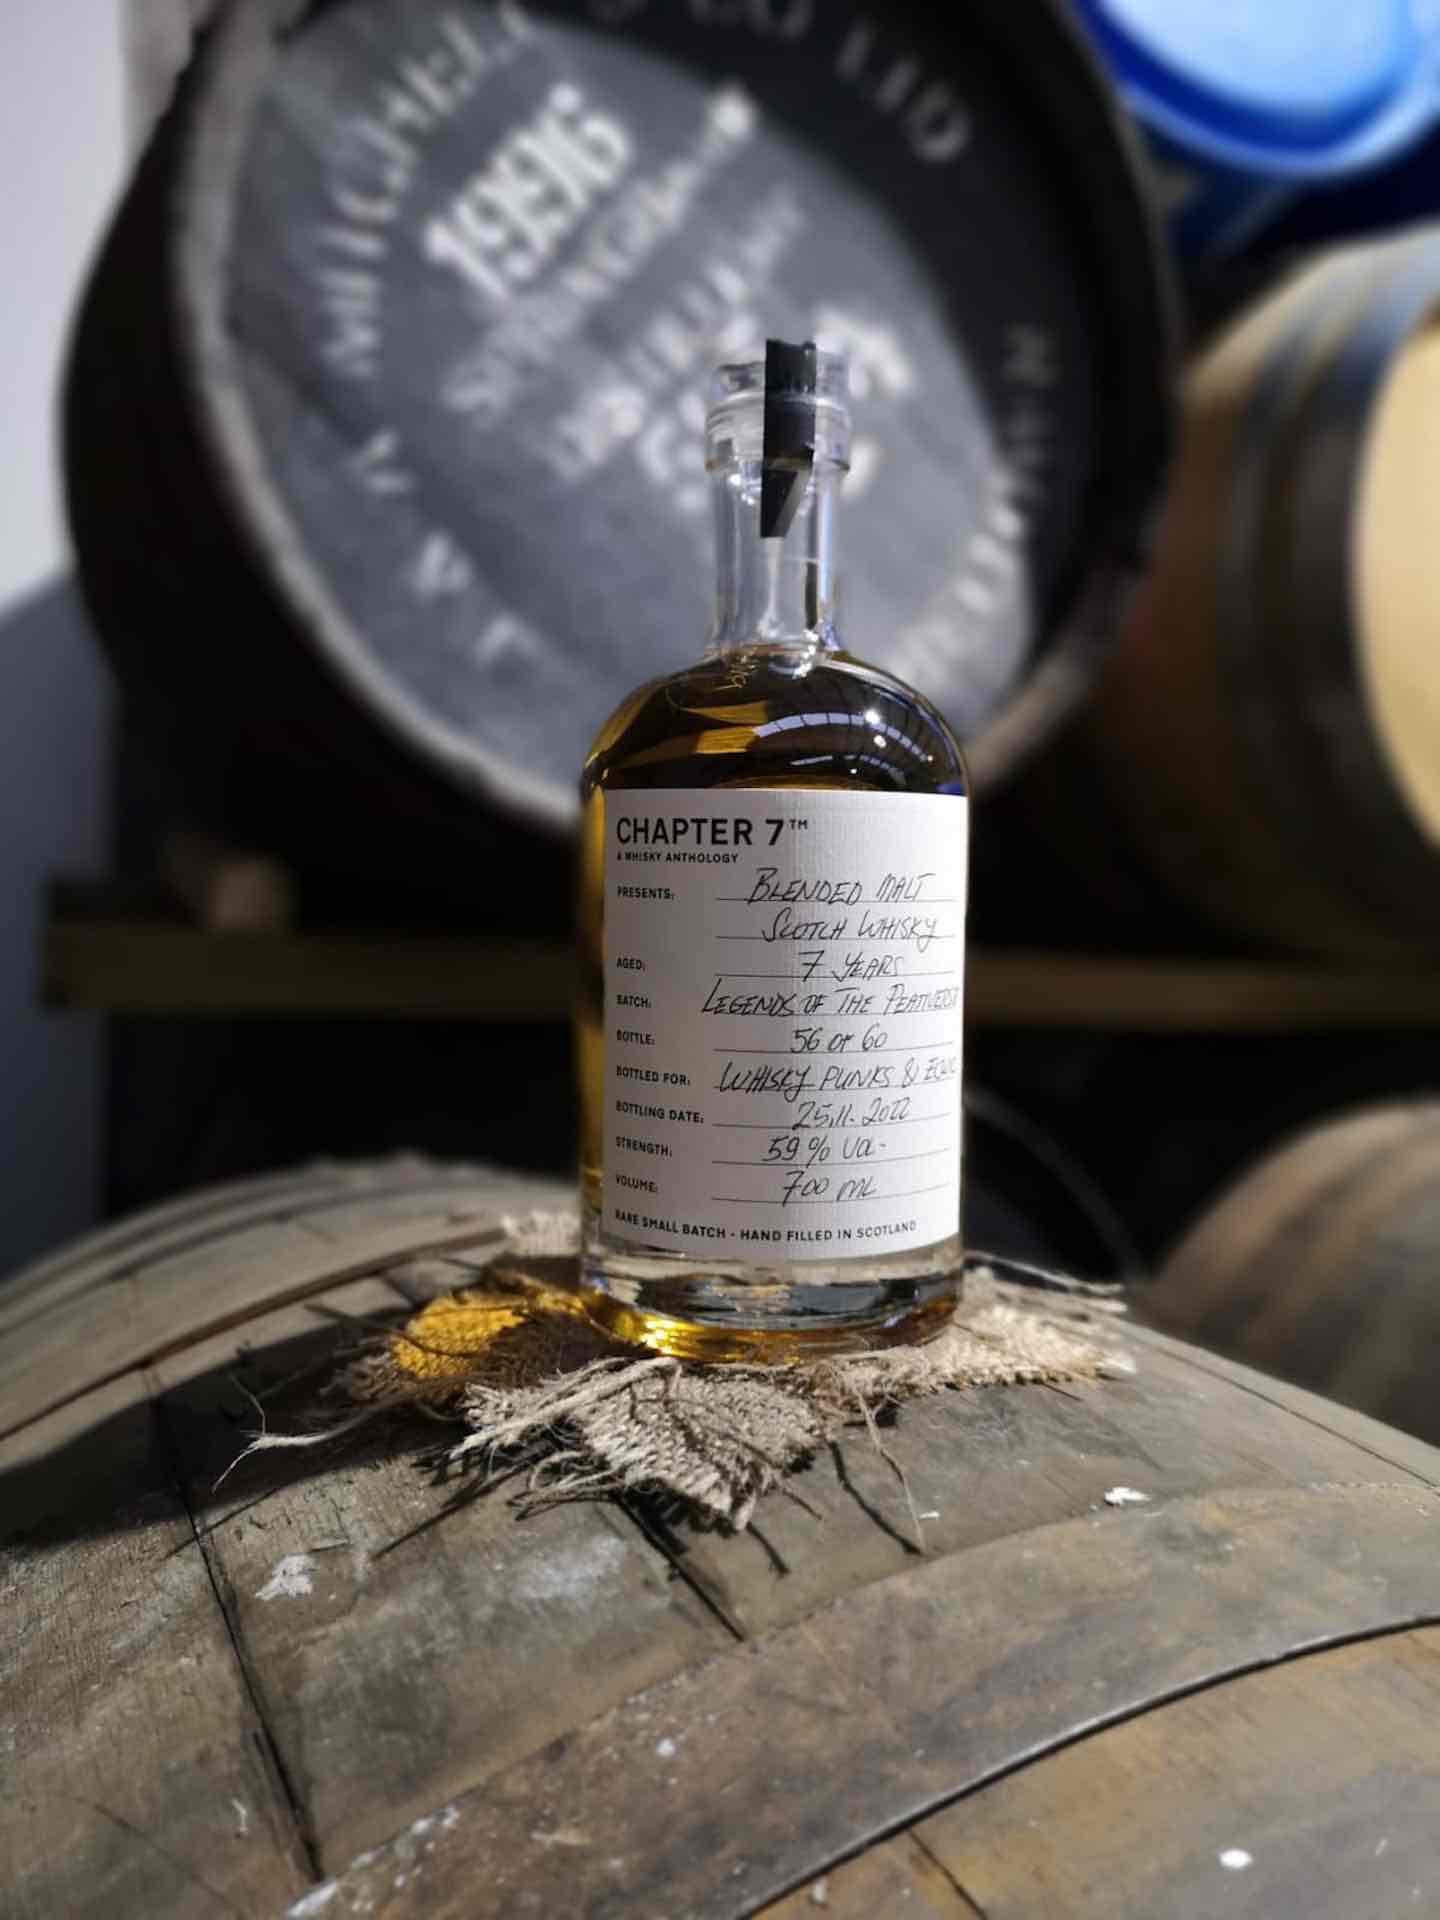 Chapter 7, Legends of the Peativerse, Blended Malt 7 Year Old